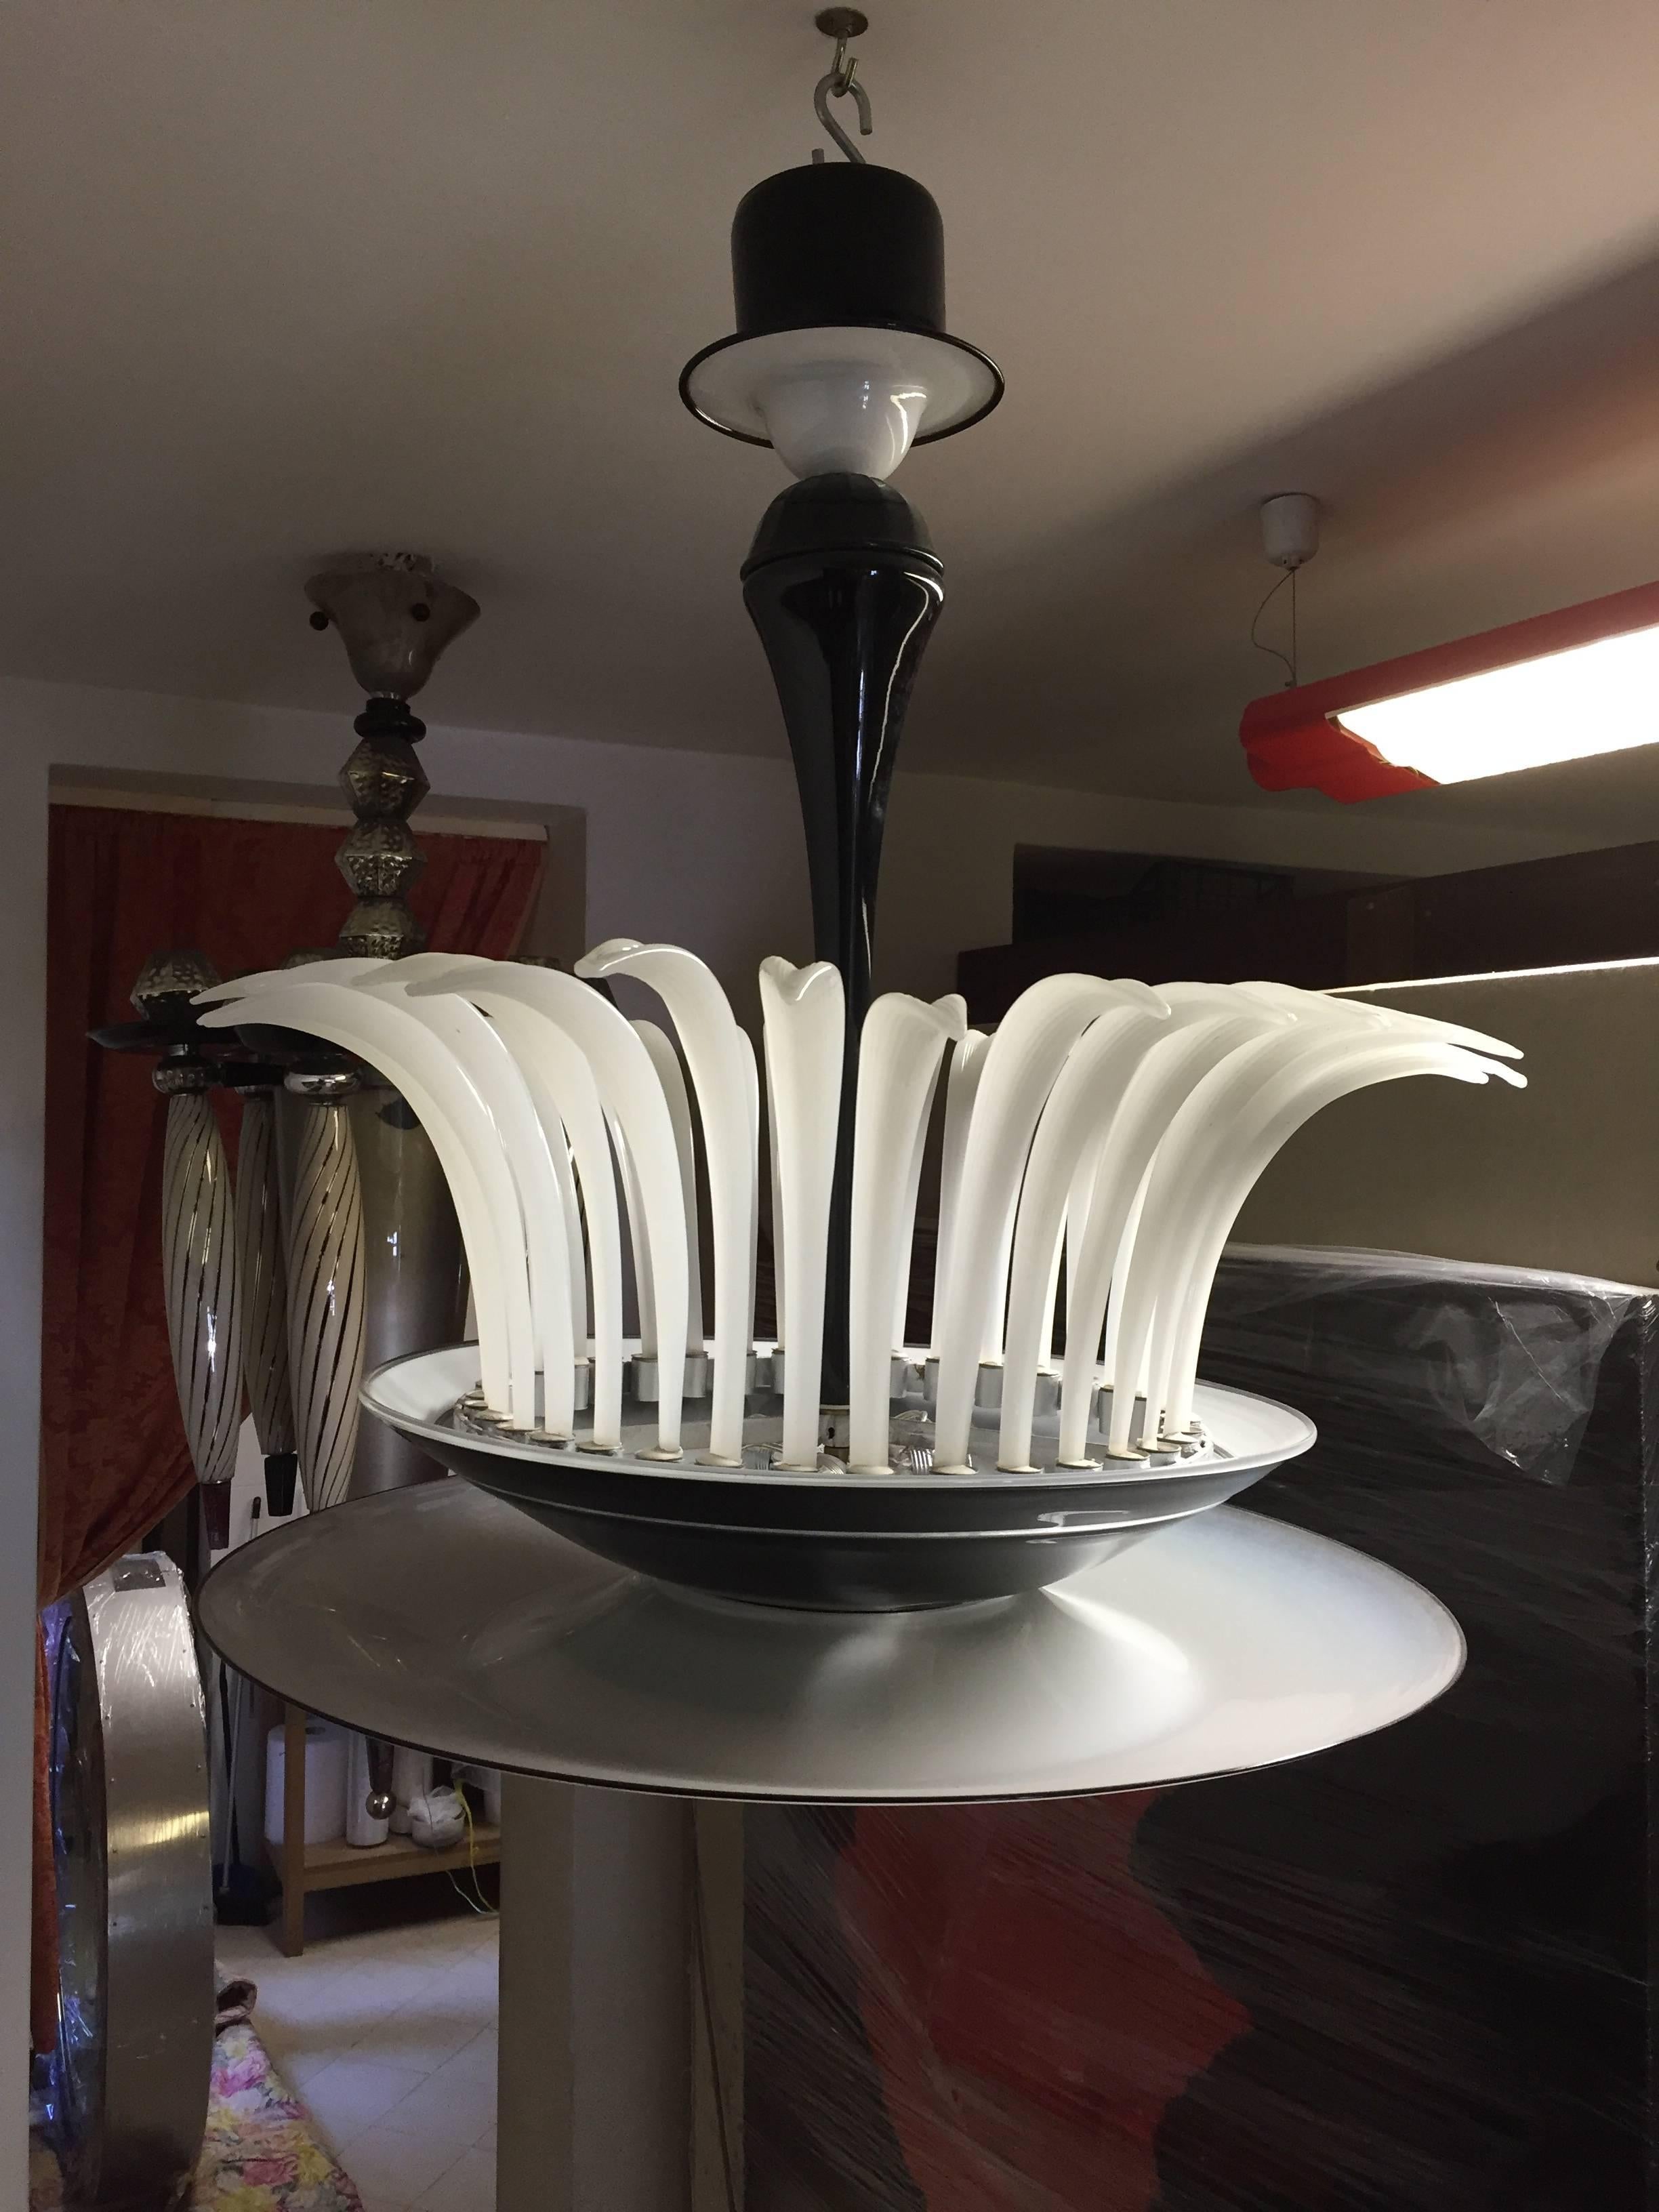 A stunning Murano glass chandelier formed by a big white bowl supported by a black dish with Greek decor engraved, a black bowl covers the metal structure that contains the leaves in opal glass.